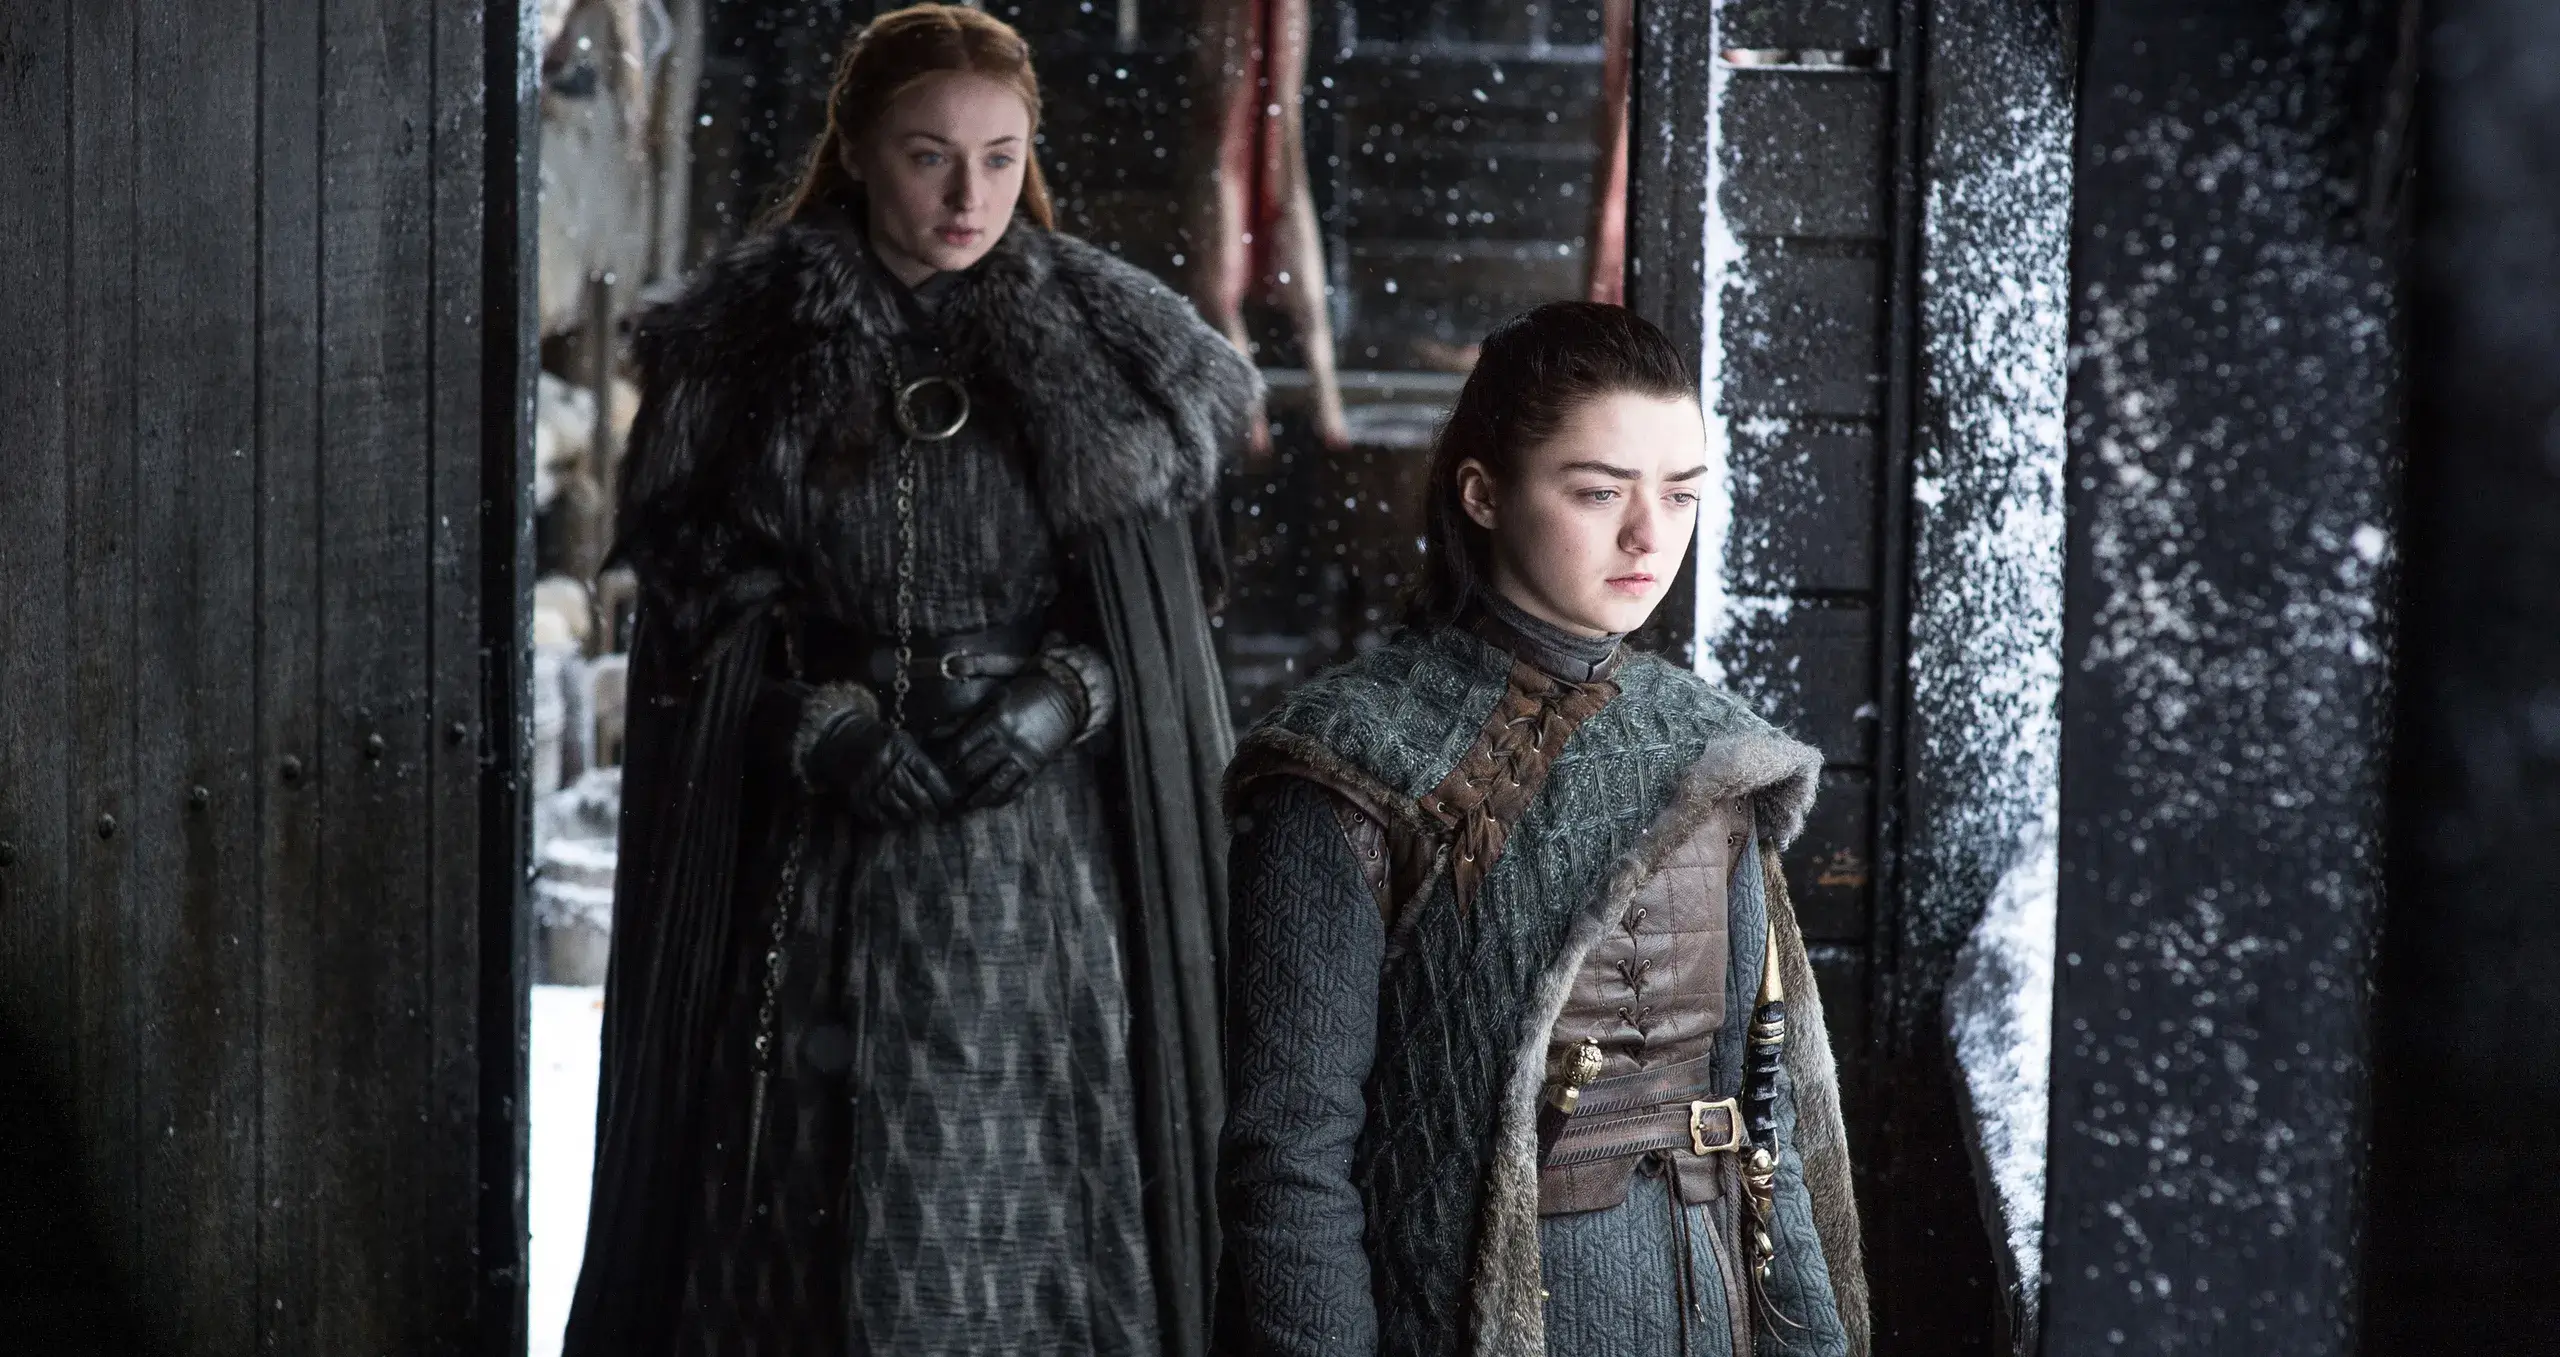 Maisie Williams with Sophie Turner in a still from Game of Thrones